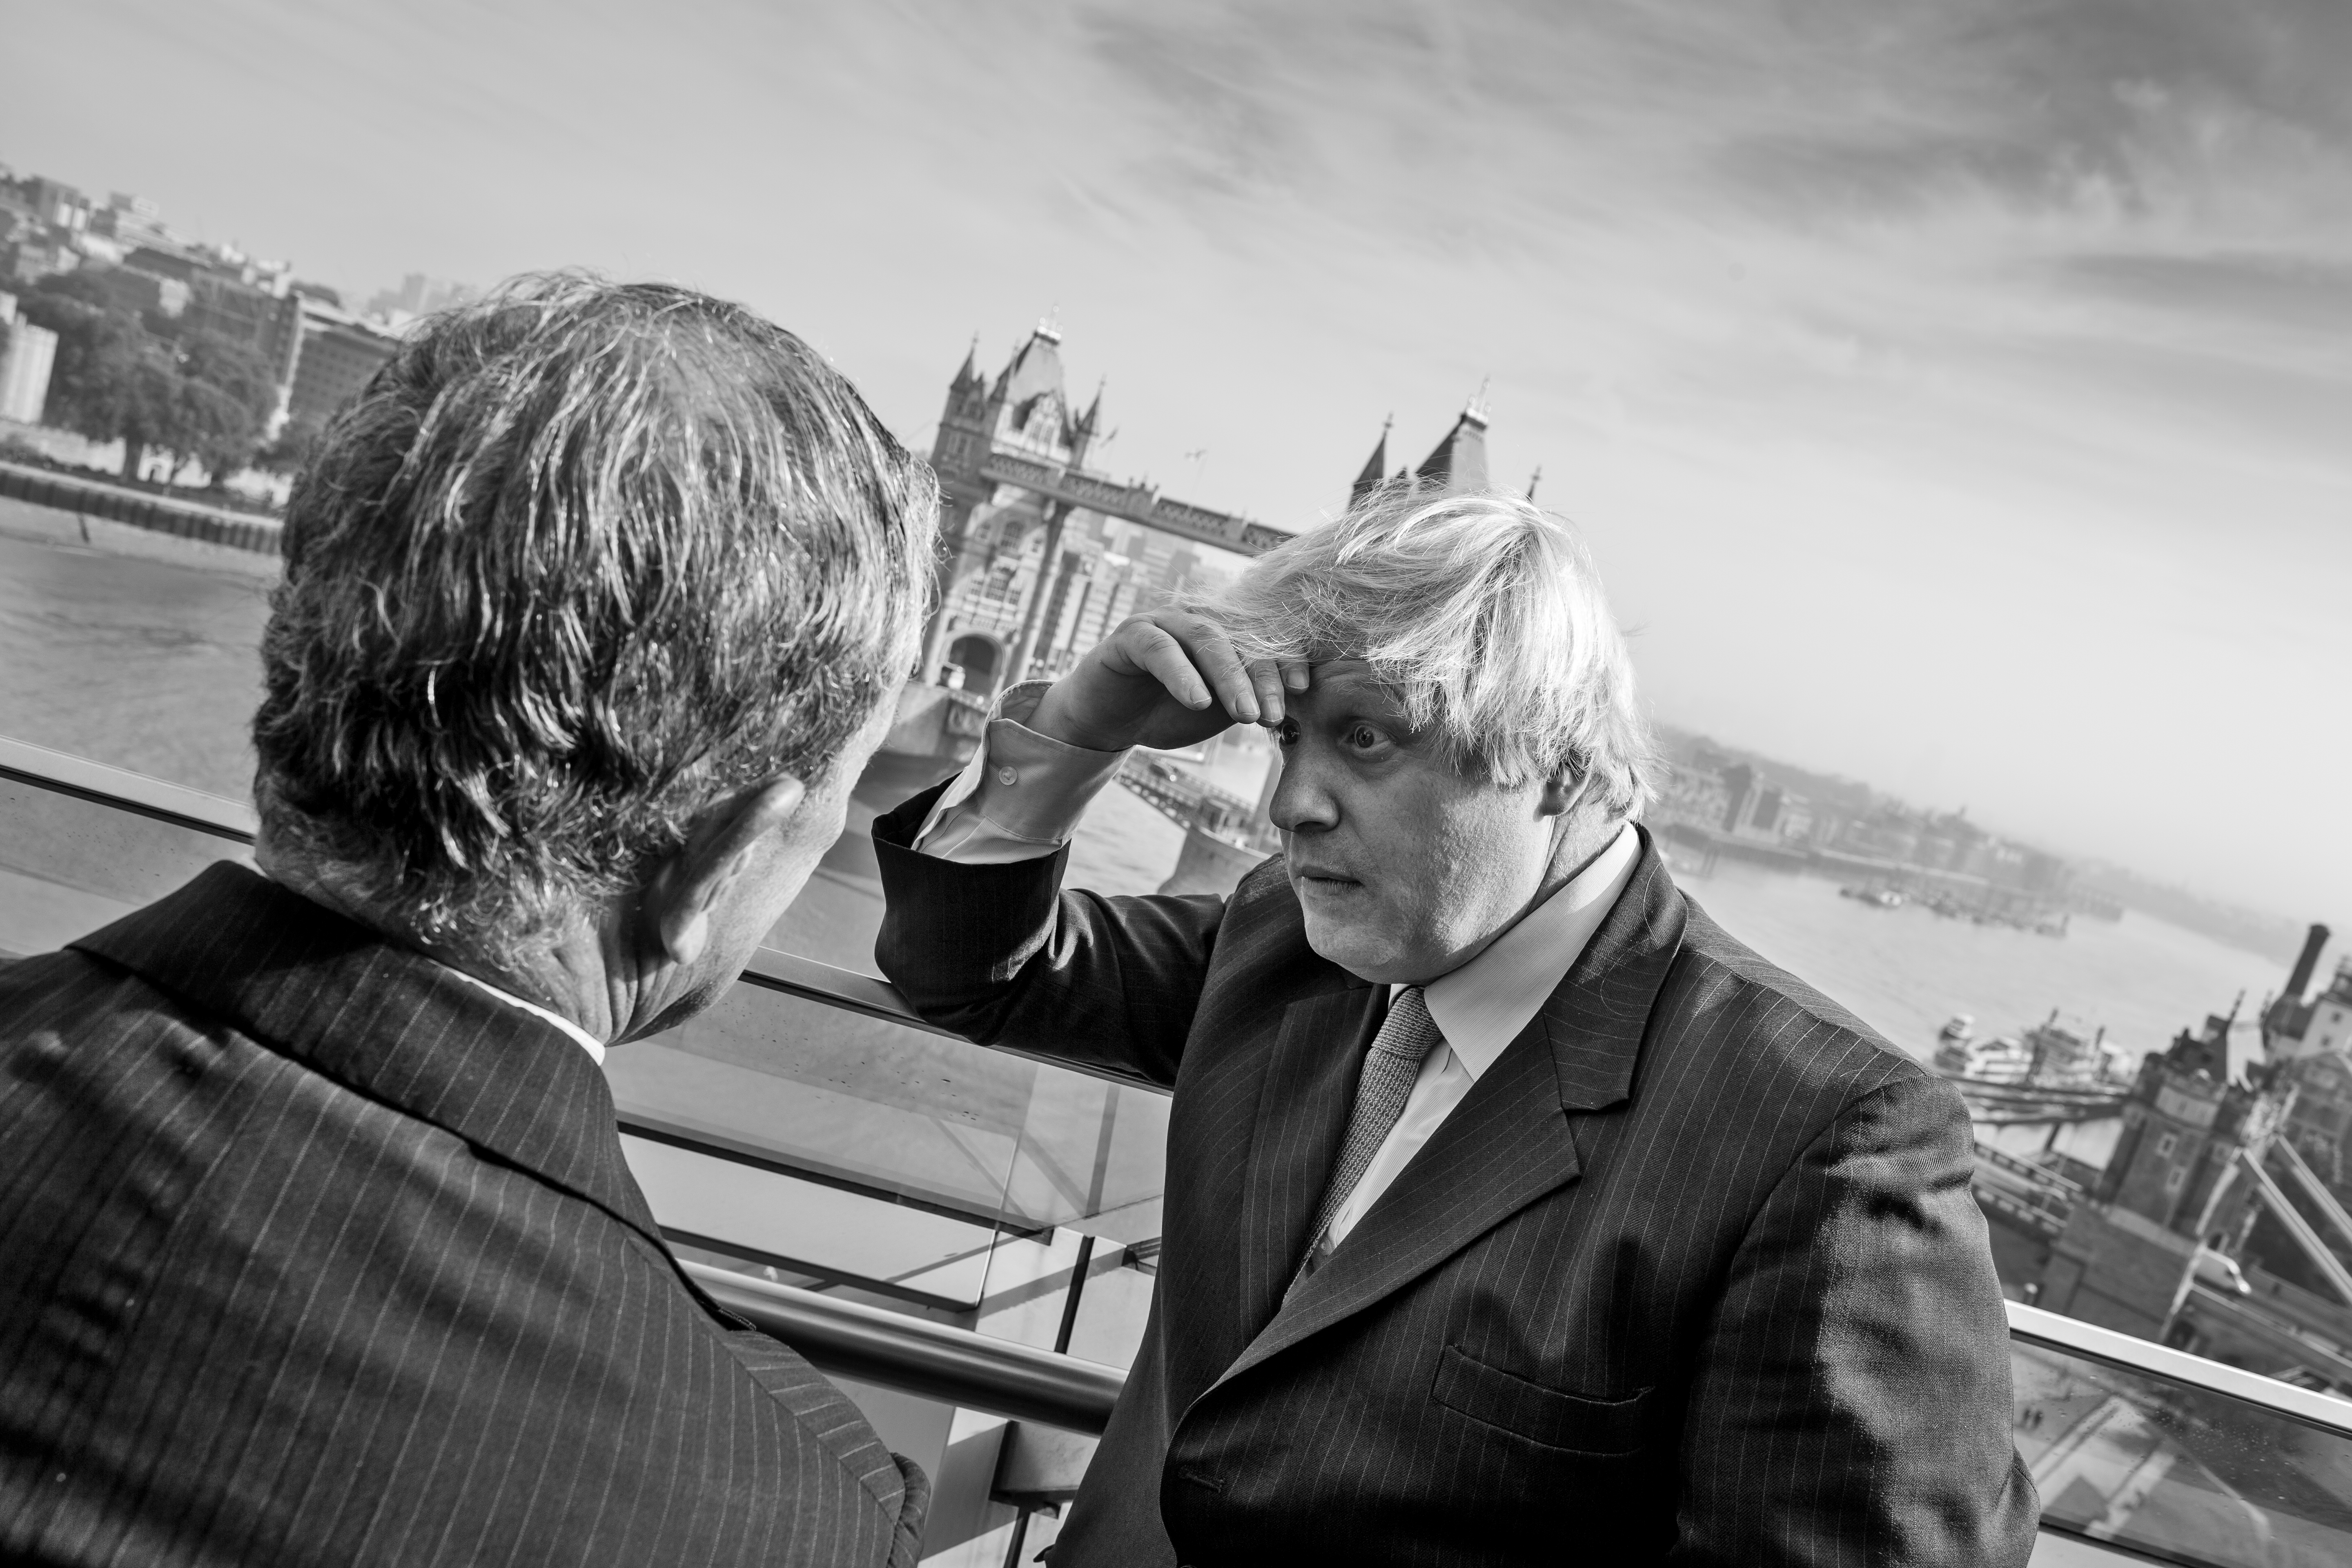 The two Mayors take in the skyline along London's Thames river.